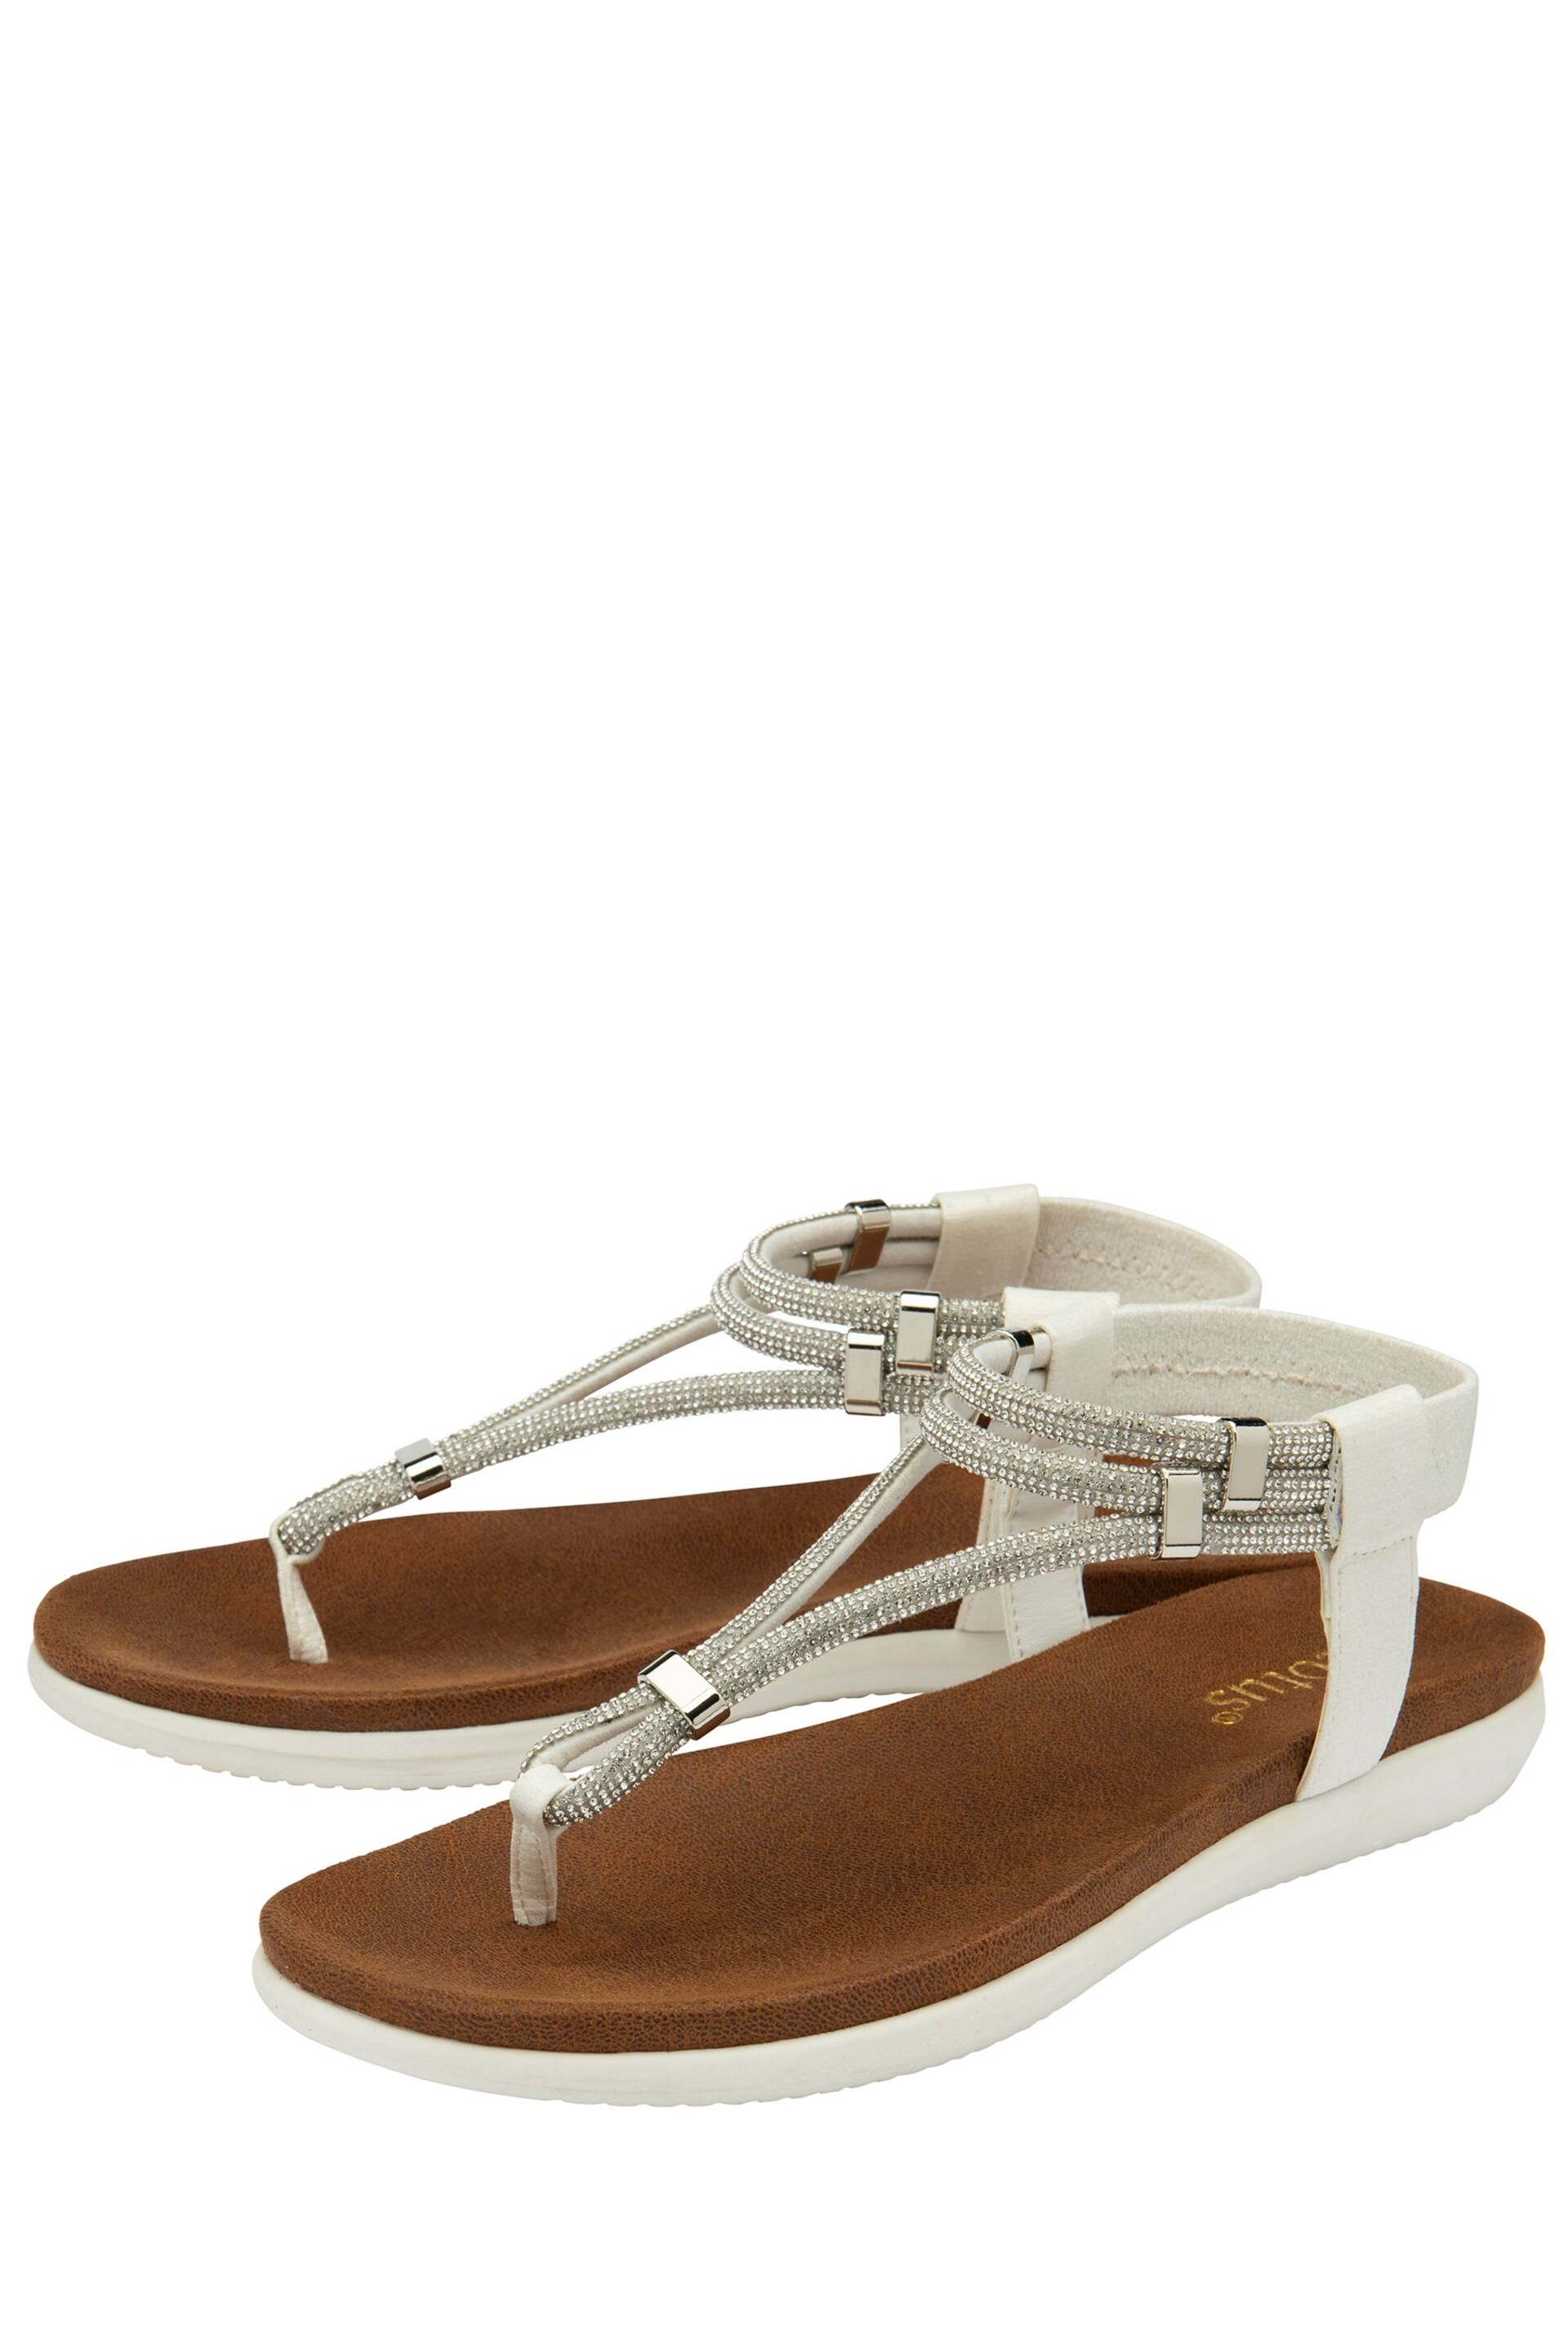 Lotus White Casual Toe Thong Sandals - Image 2 of 4